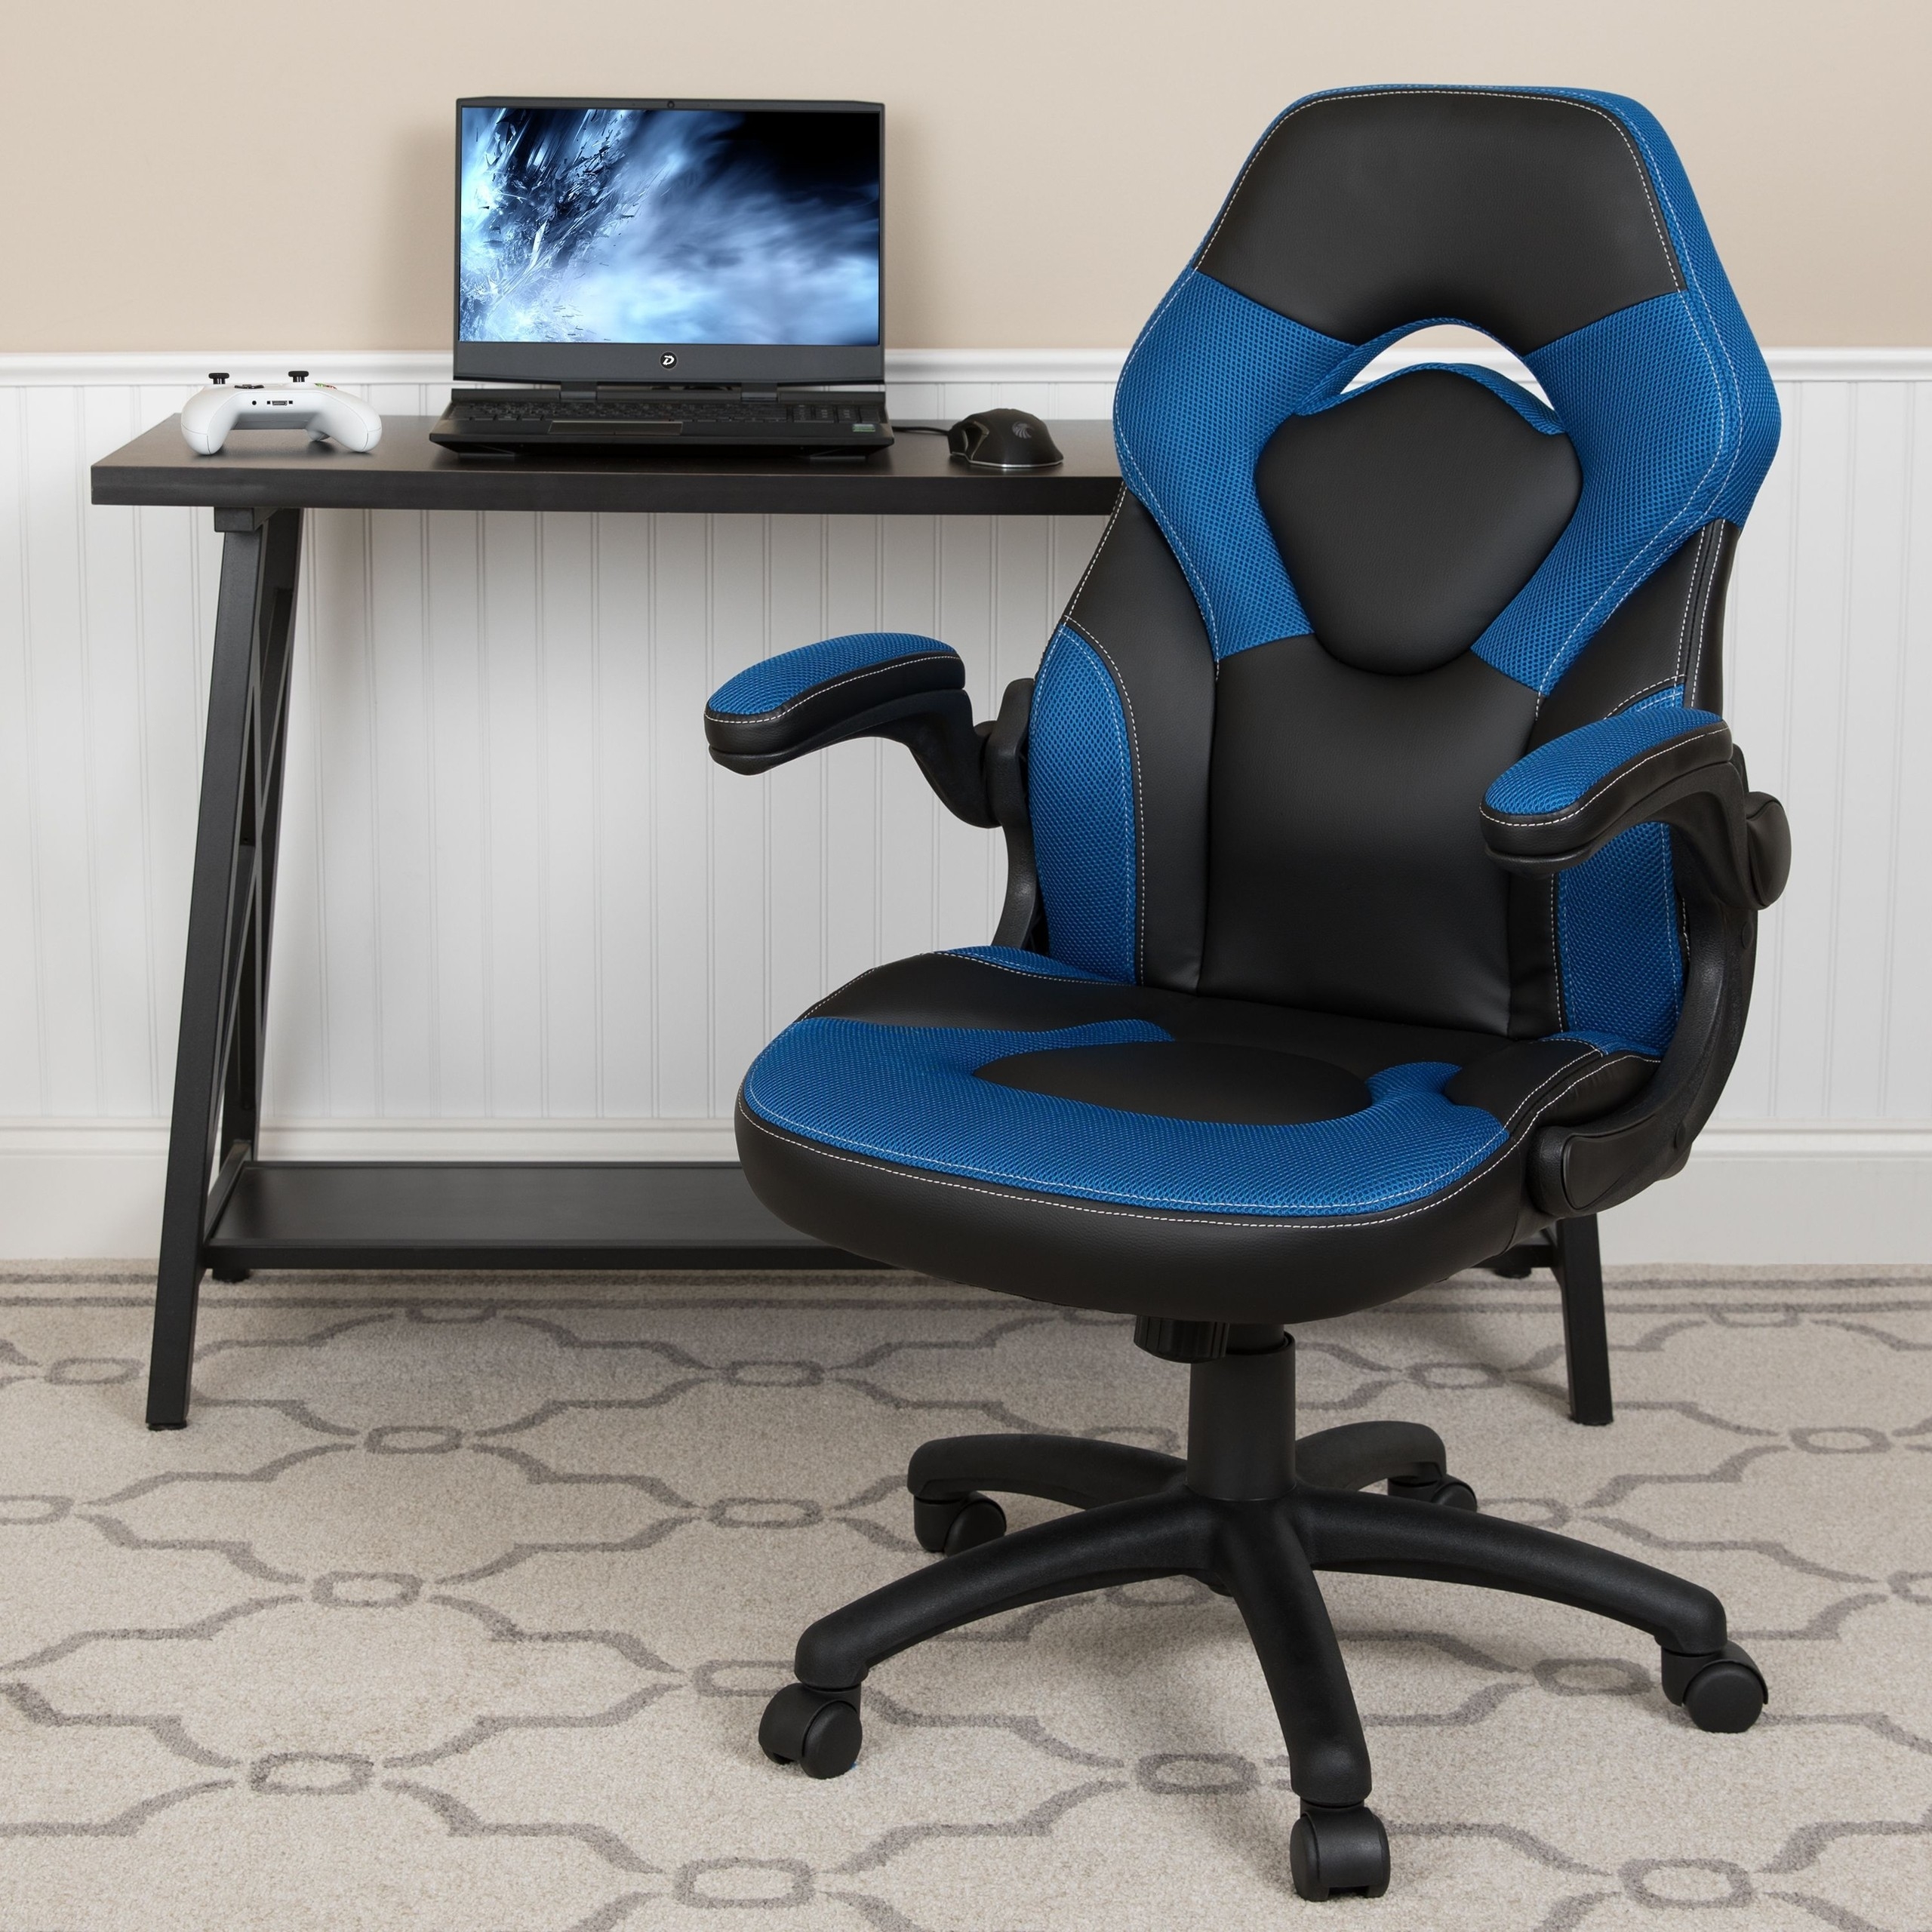 7 Things to Consider When Buying a Gaming Chair - Foter